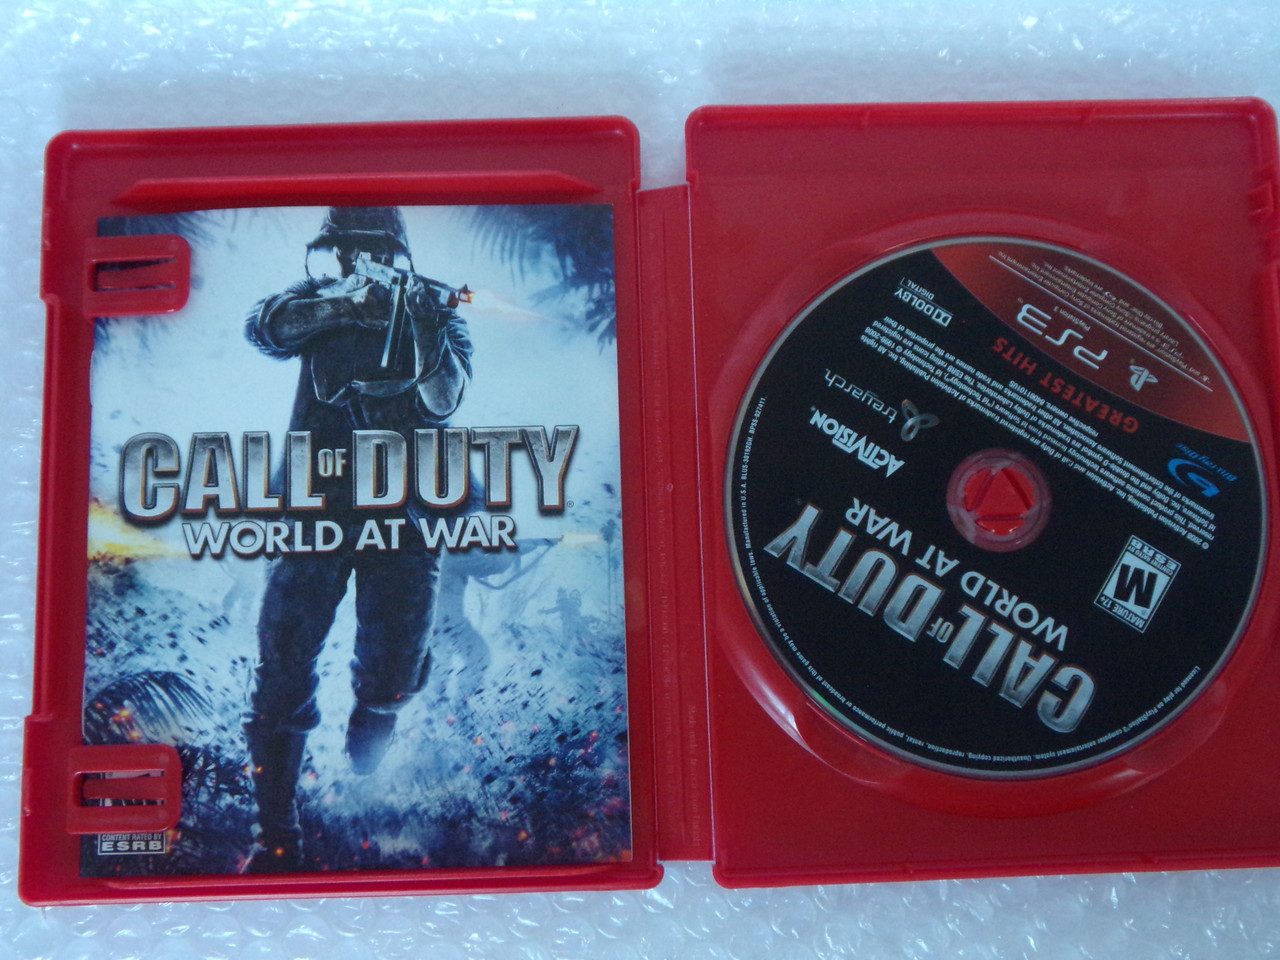 Call of Duty World At War PS3 Game Disc, Video Gaming, Video Games,  PlayStation on Carousell